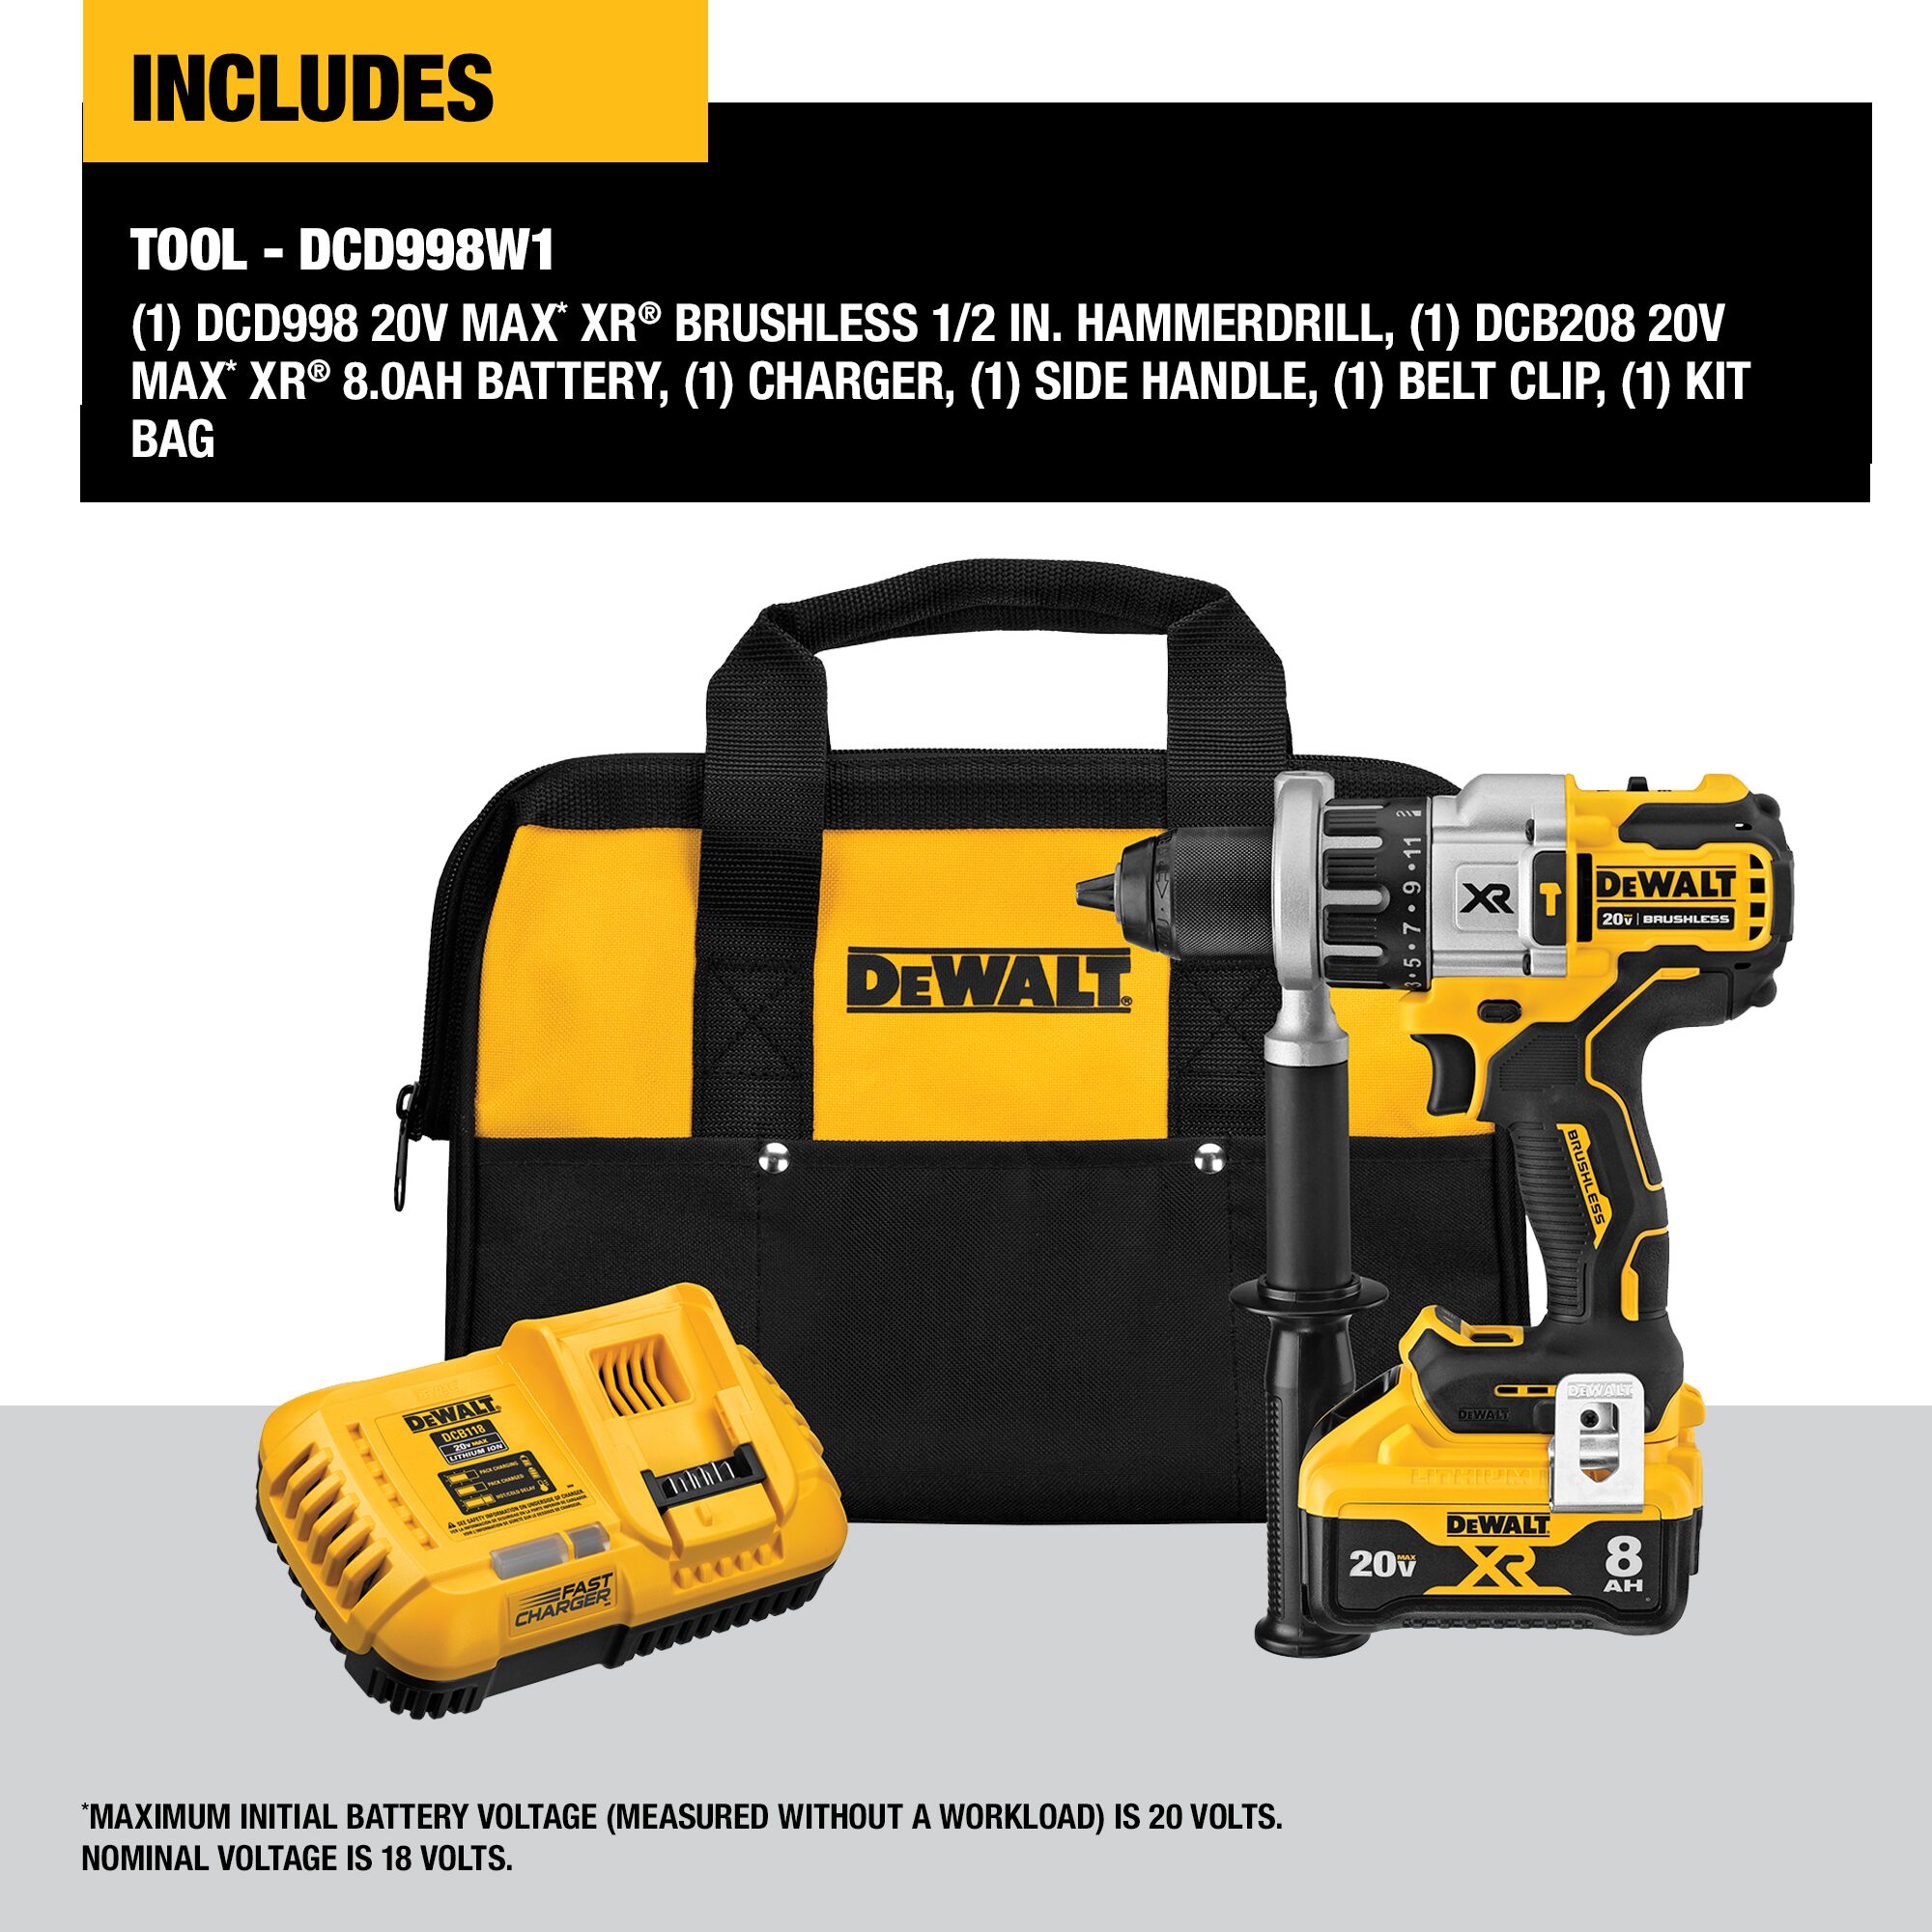 DeWalt 20V Max Cordless Compact Heat Gun and 20V Lithium-Ion 5.0Ah Battery, Charger & Kit Bag w/Flat & Hook Nozzle Attachments